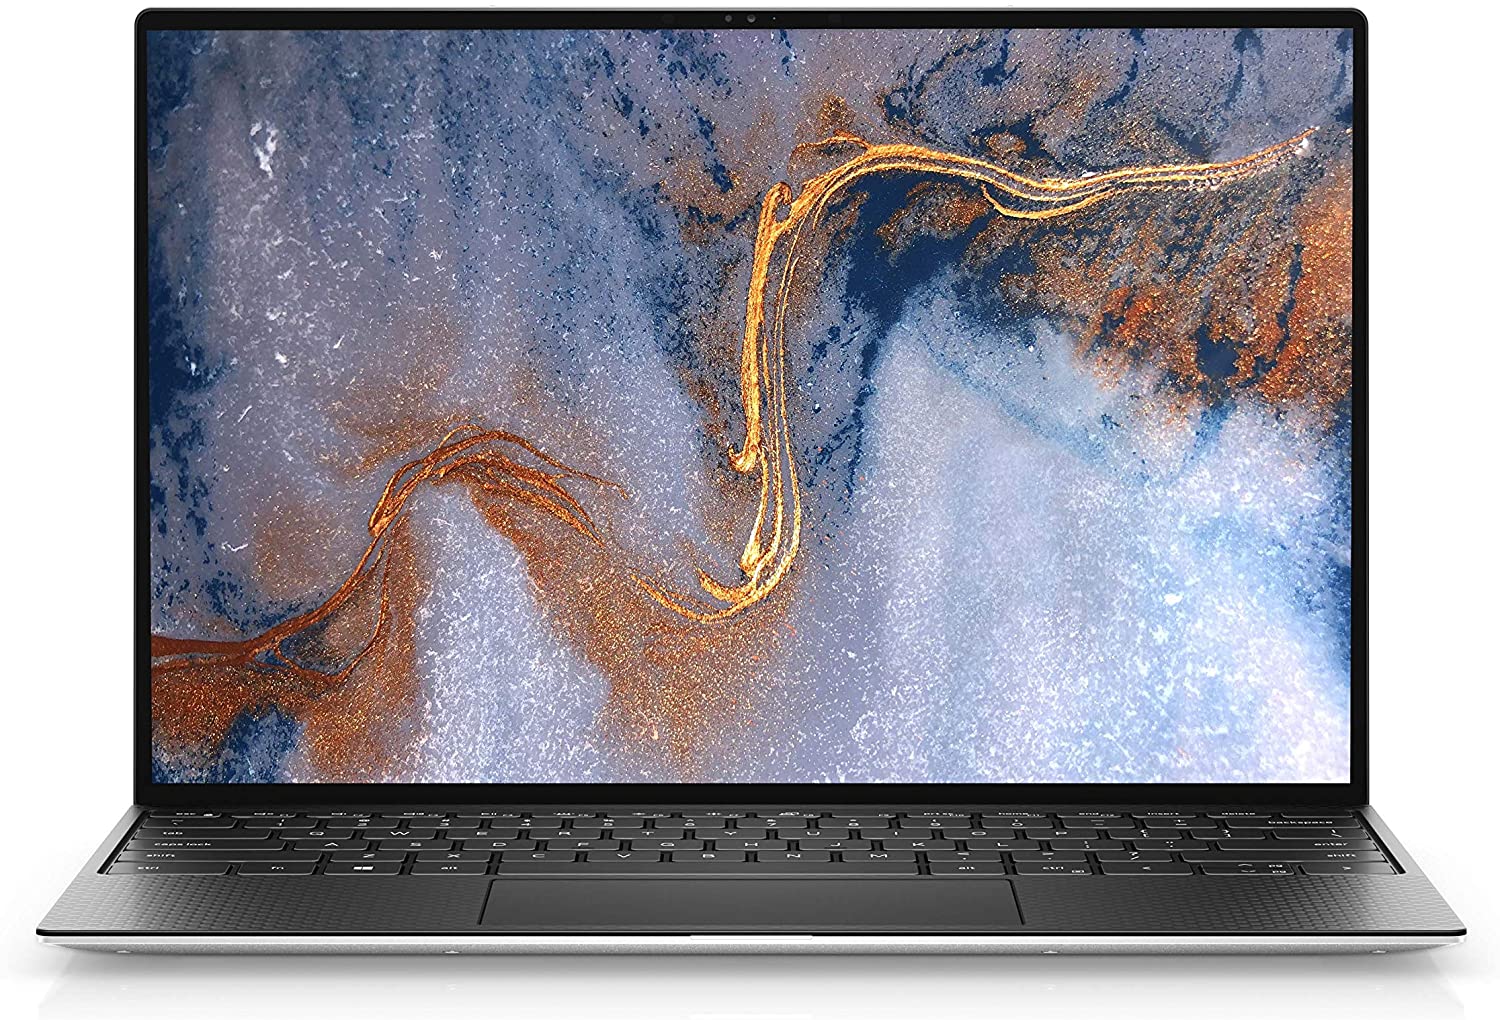 Amazon: Dell XPS 13 13.4 inch UHD+ Touch Laptop, Intel Core i7-1185G7, 32GB 4267MHz LPDDR4x RAM, 2TB SSD, Windows 10 Home $1809.98